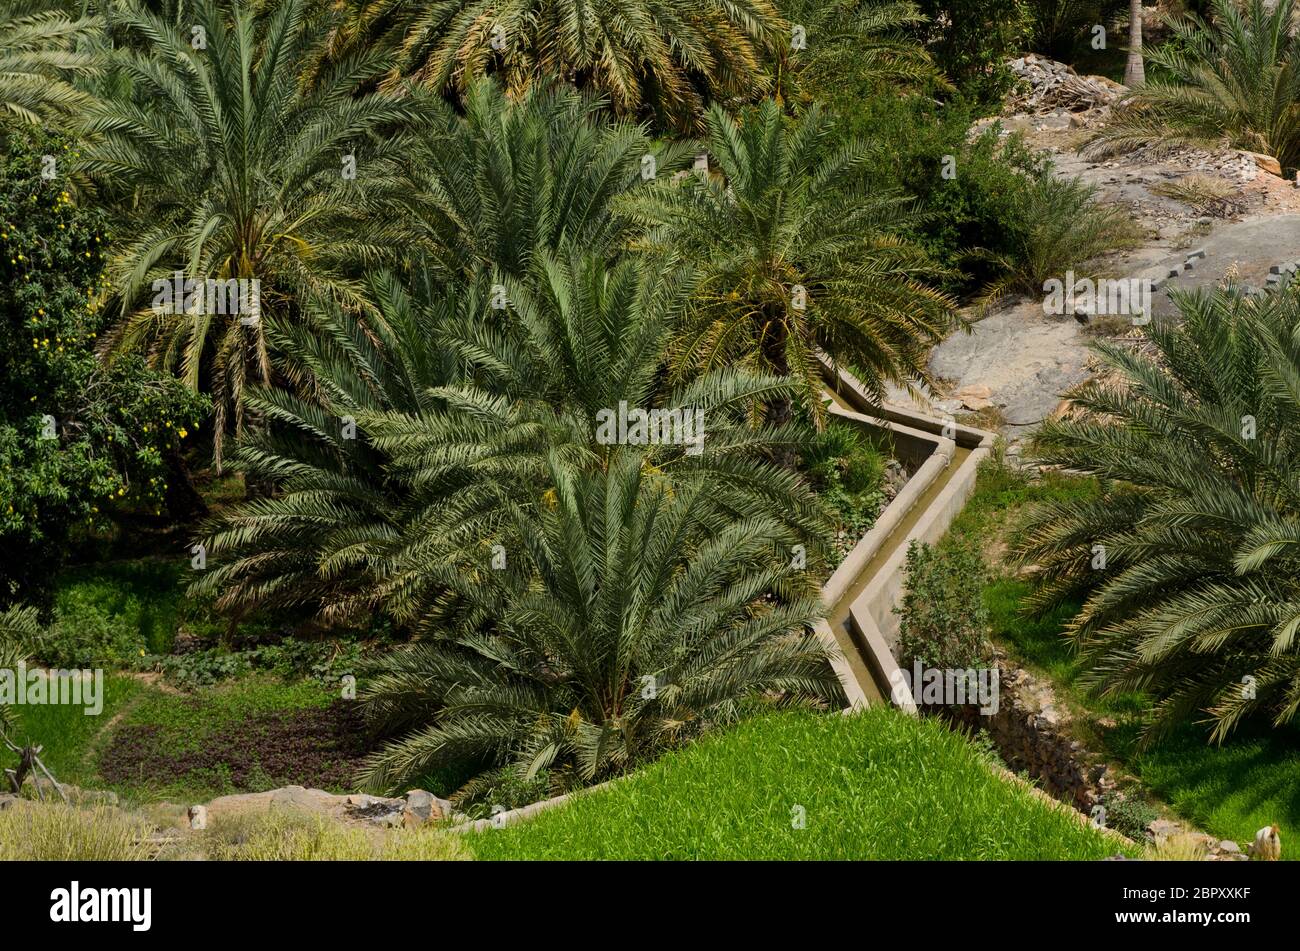 Muscat, Oman. May 29th 2014 Traditional Aflaj Irrigation System in a date palm garden near Muscat, Oman. Stock Photo